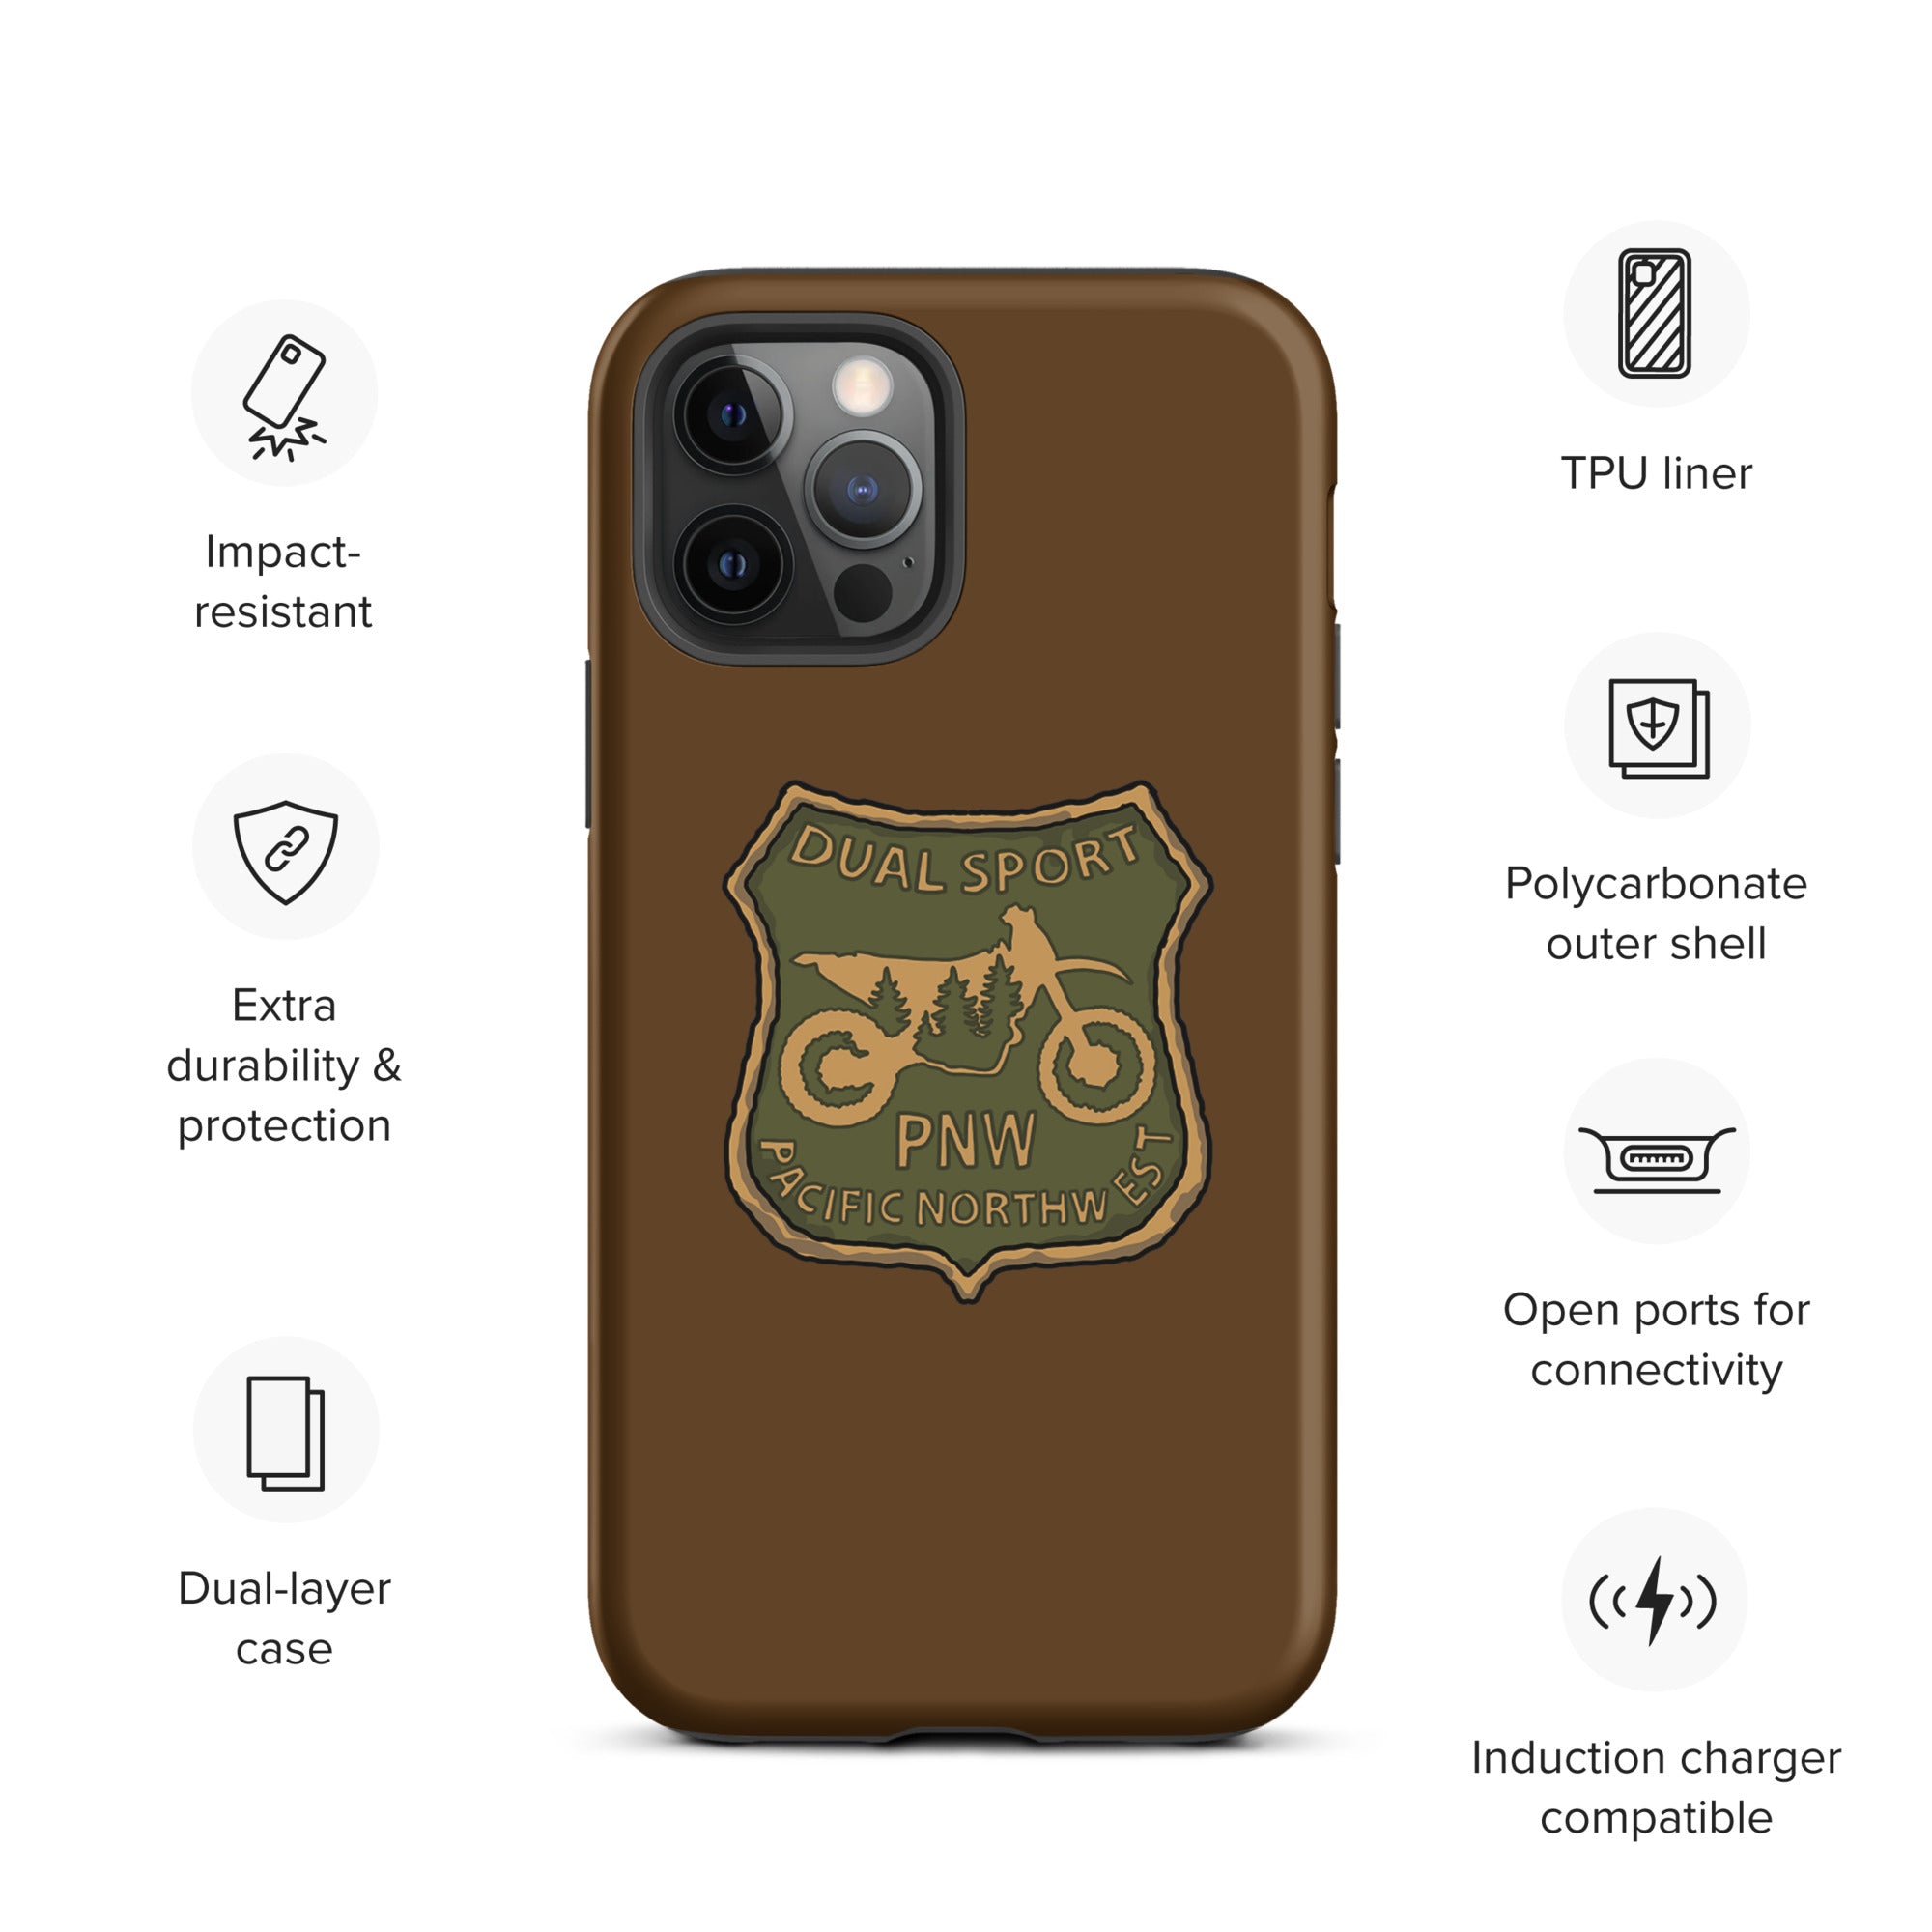 Sketchy Doodle Phone Case, Tough, iPhone, Brown